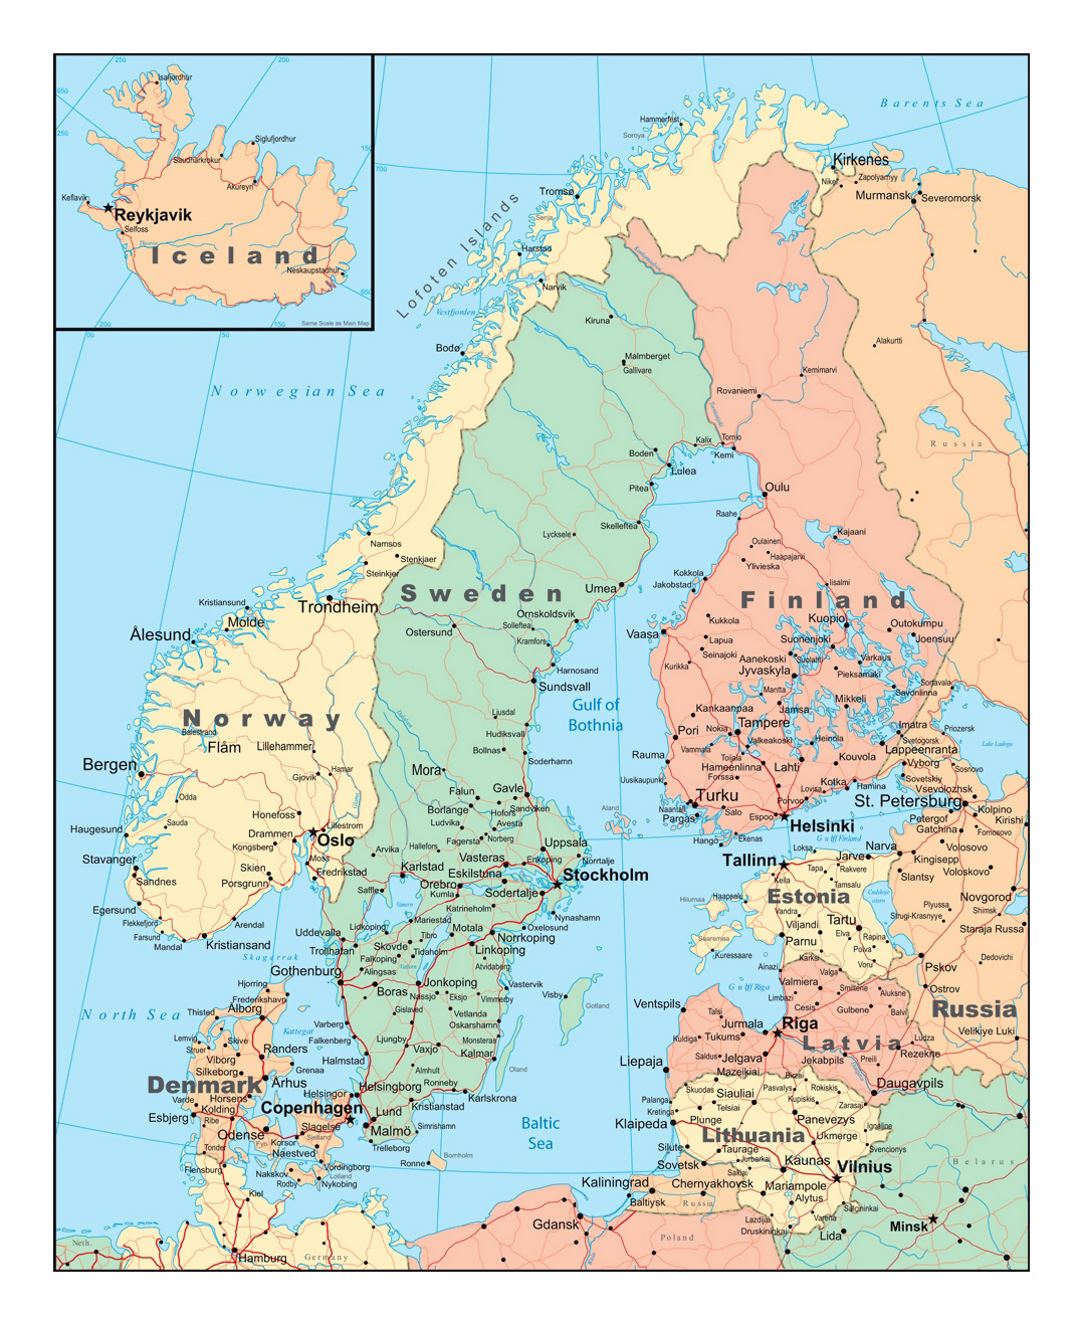 Political map of Scandinavia with roads and cities